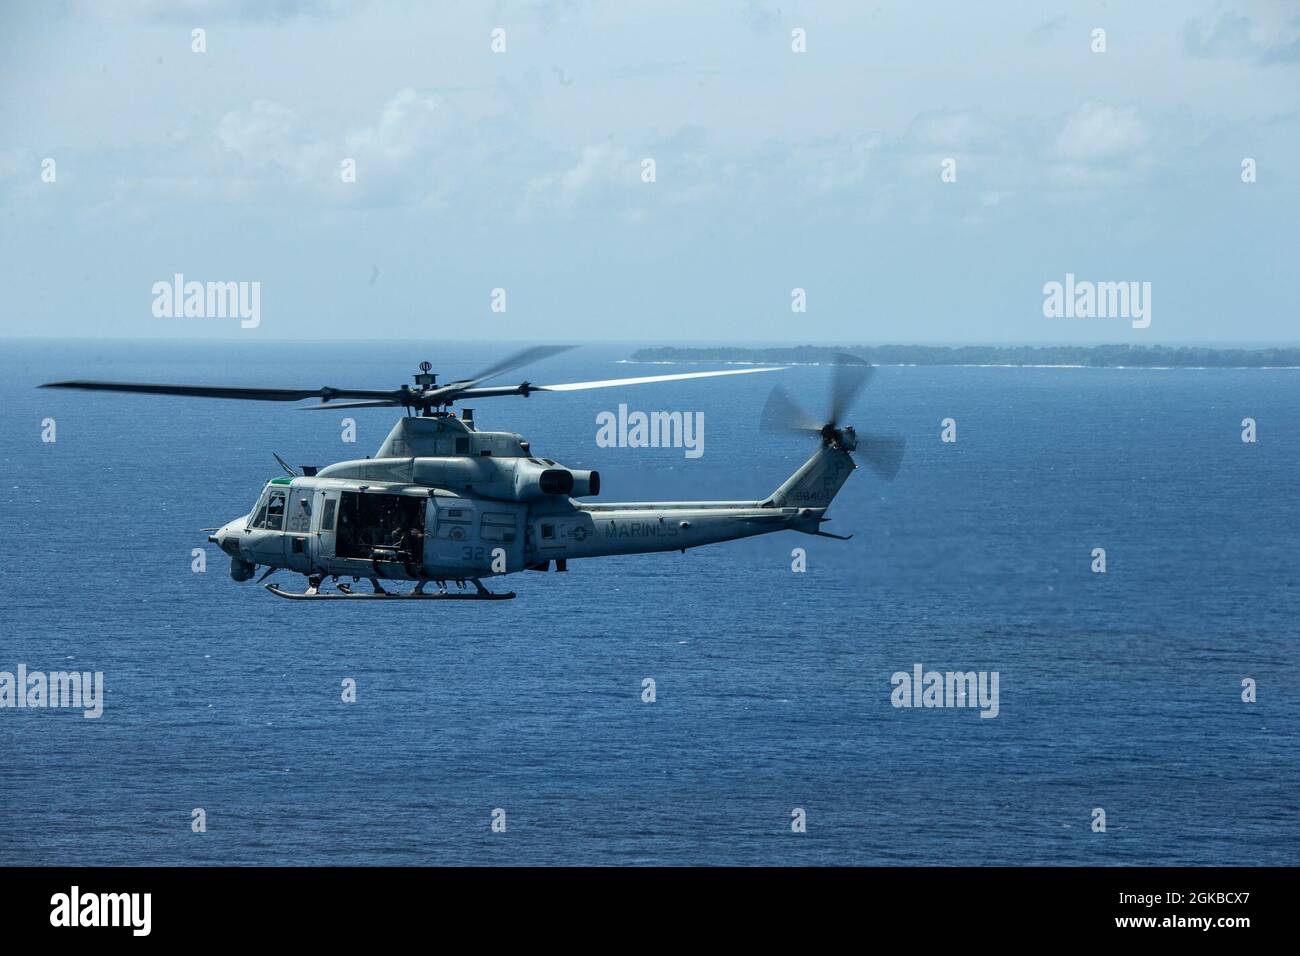 A U.S. Marine Corps UH-1Y Huey with Marine Medium Tiltrotor Squadron 262 (Reinforced), 31st Marine Expeditionary Unit (MEU), flies above Palau after departing from USS New Orleans (LPD 18) on its way to the island of Peleliu, March 3, 2021. The 31st MEU is operating aboard ships of the Amphibious Squadron 11 in the 7th fleet area of operations to enhance interoperability with allies and partners and serve as a ready response force to defend peace and stability in the Indo-Pacific region. Stock Photo